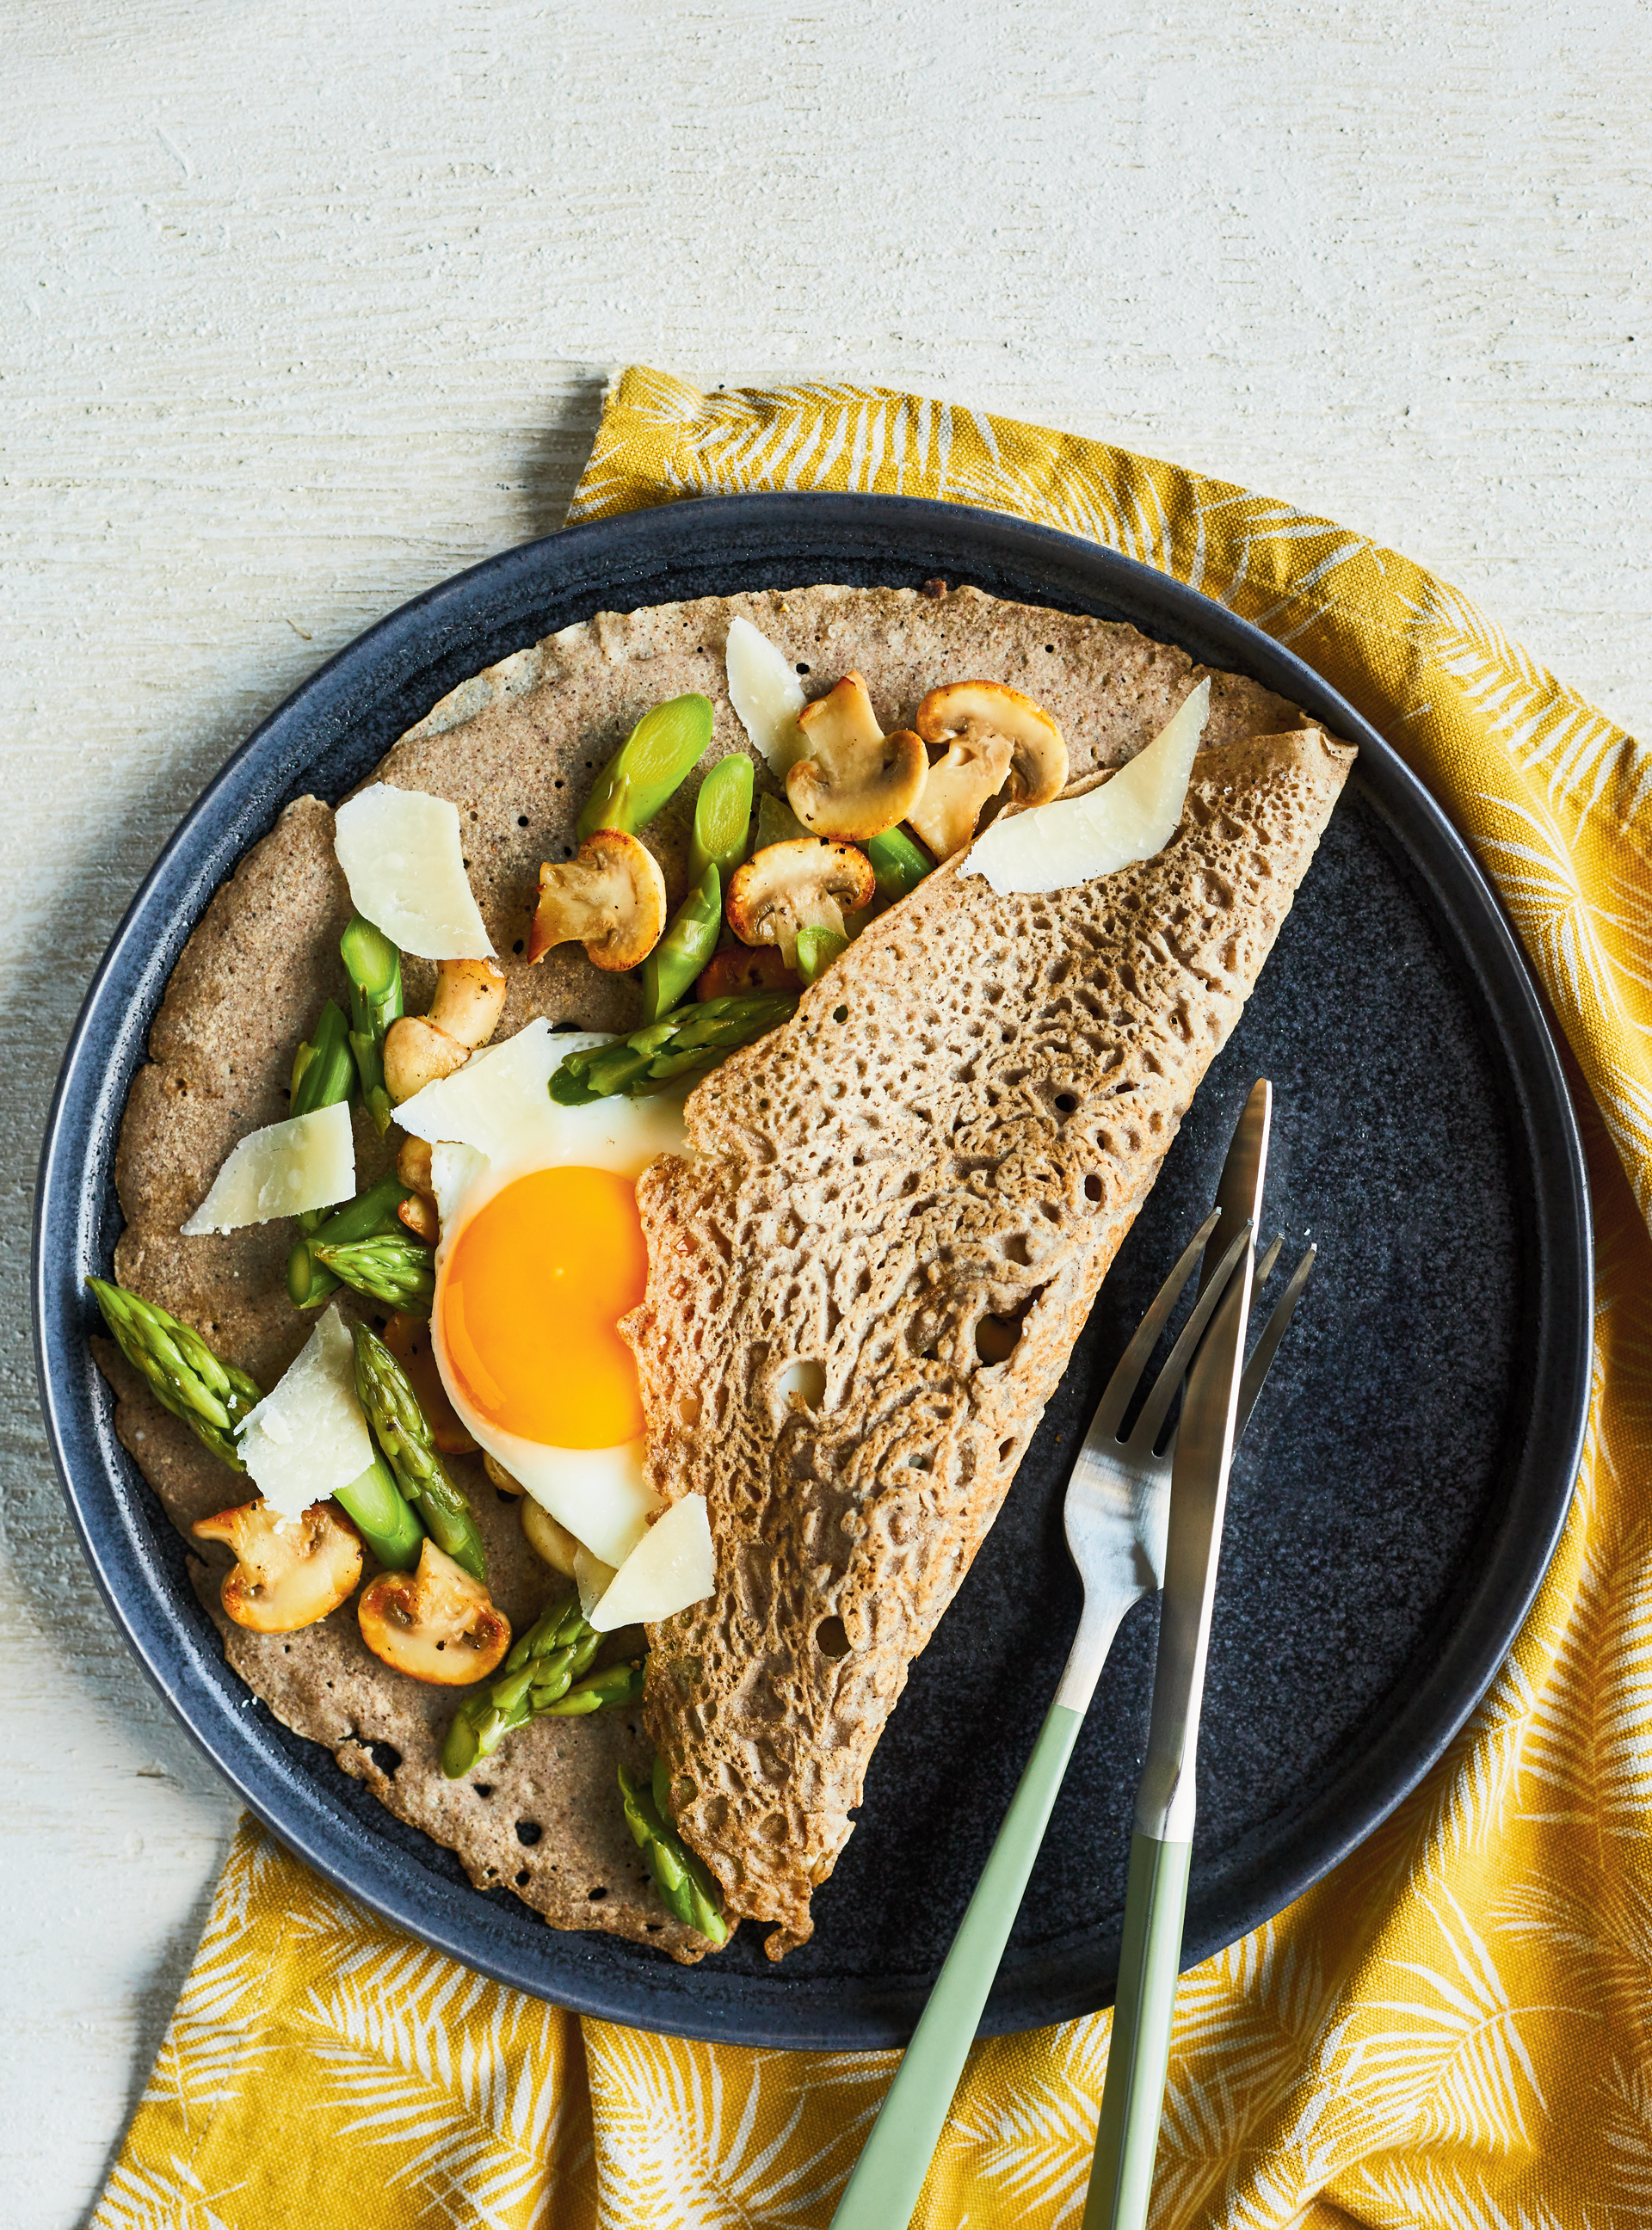 Gluten-Free Buckwheat Crepes with Mushrooms and Asparagus